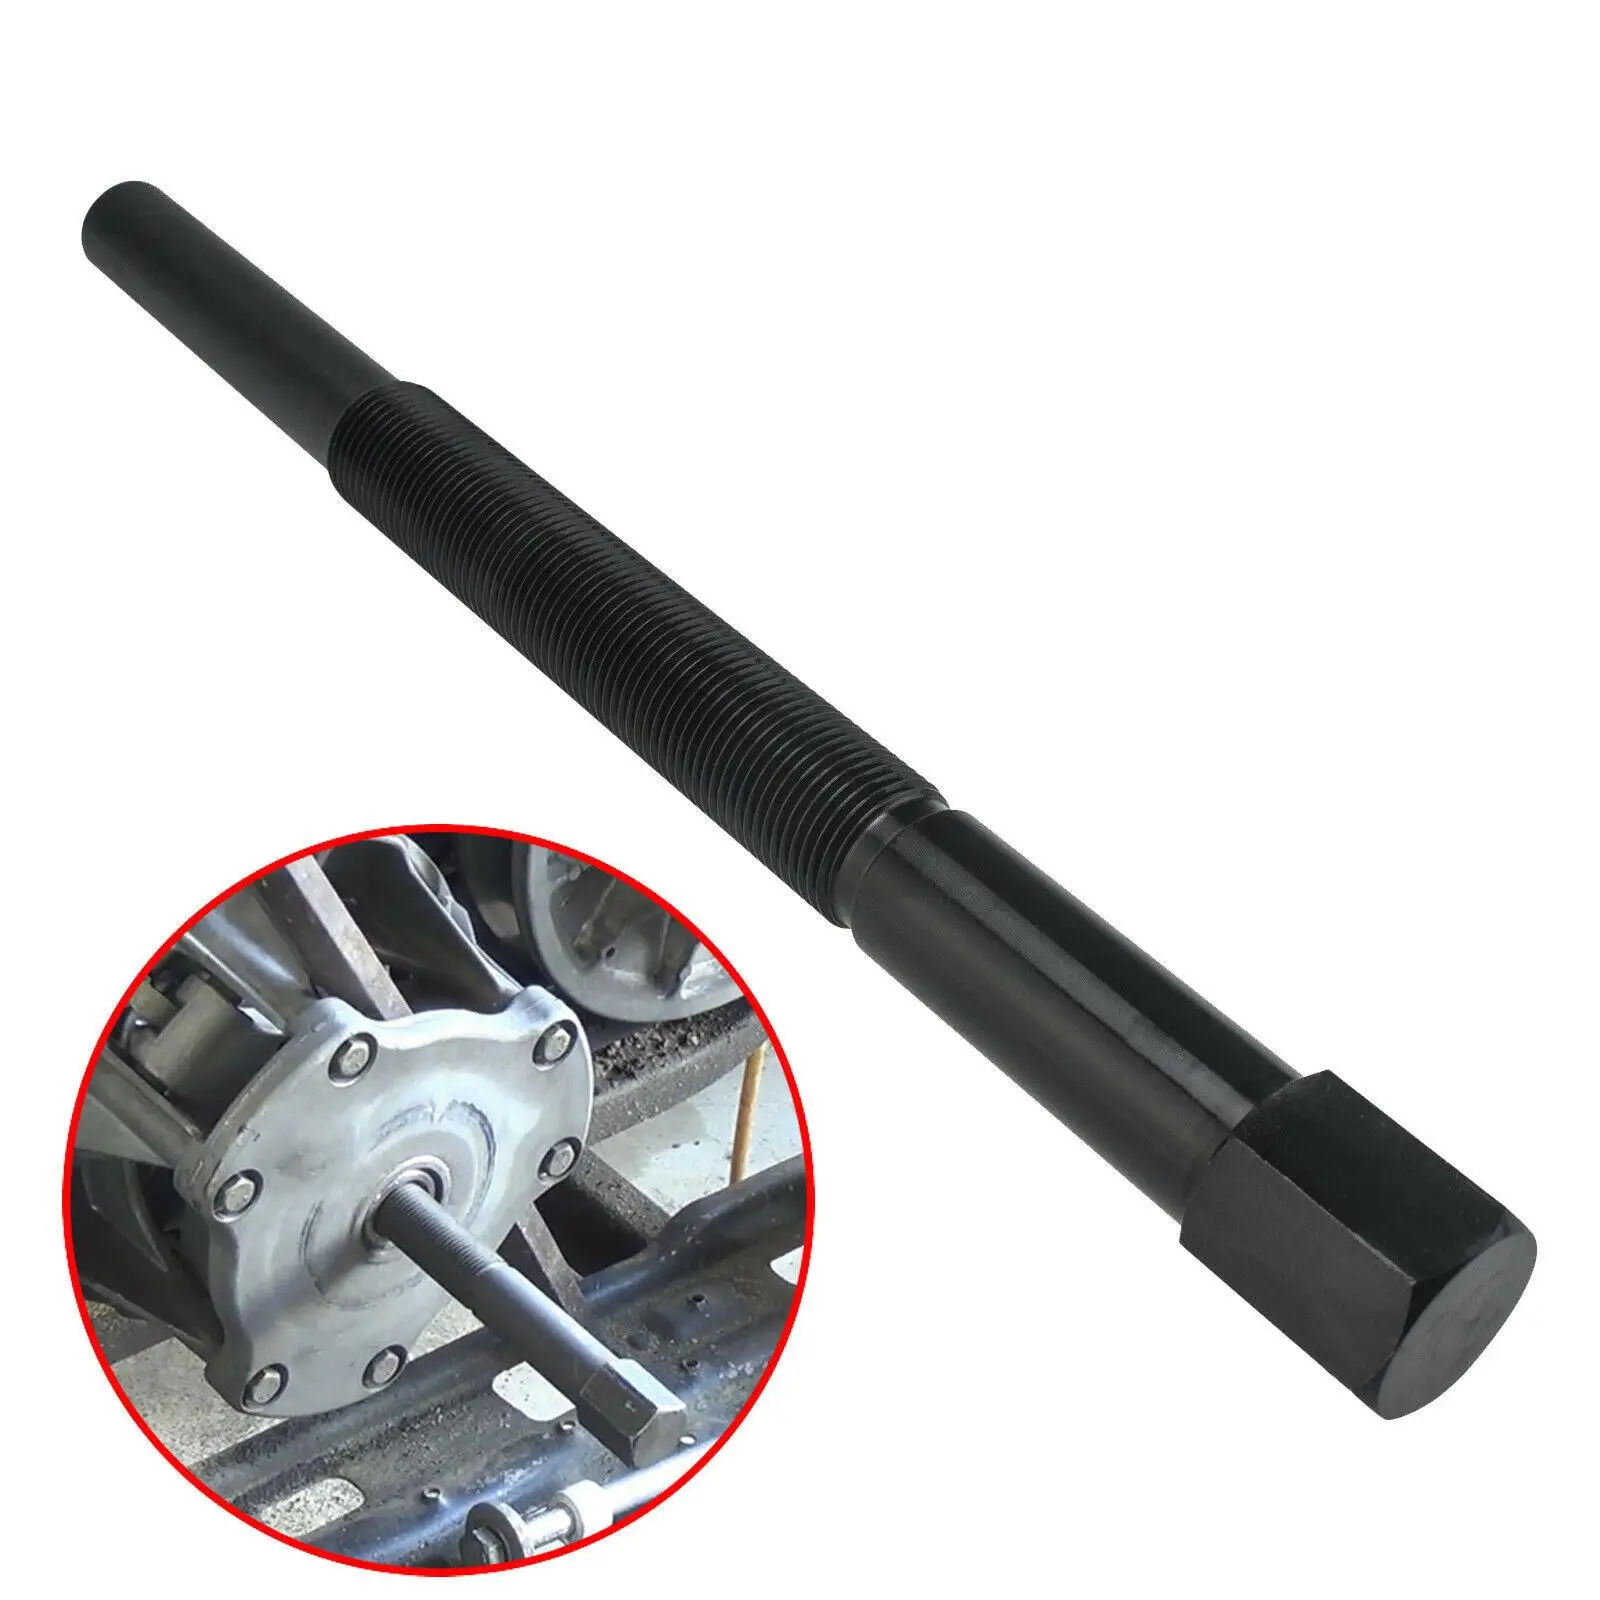 Primary Clutch Puller Tool  for Replace 2870506 Car Auto